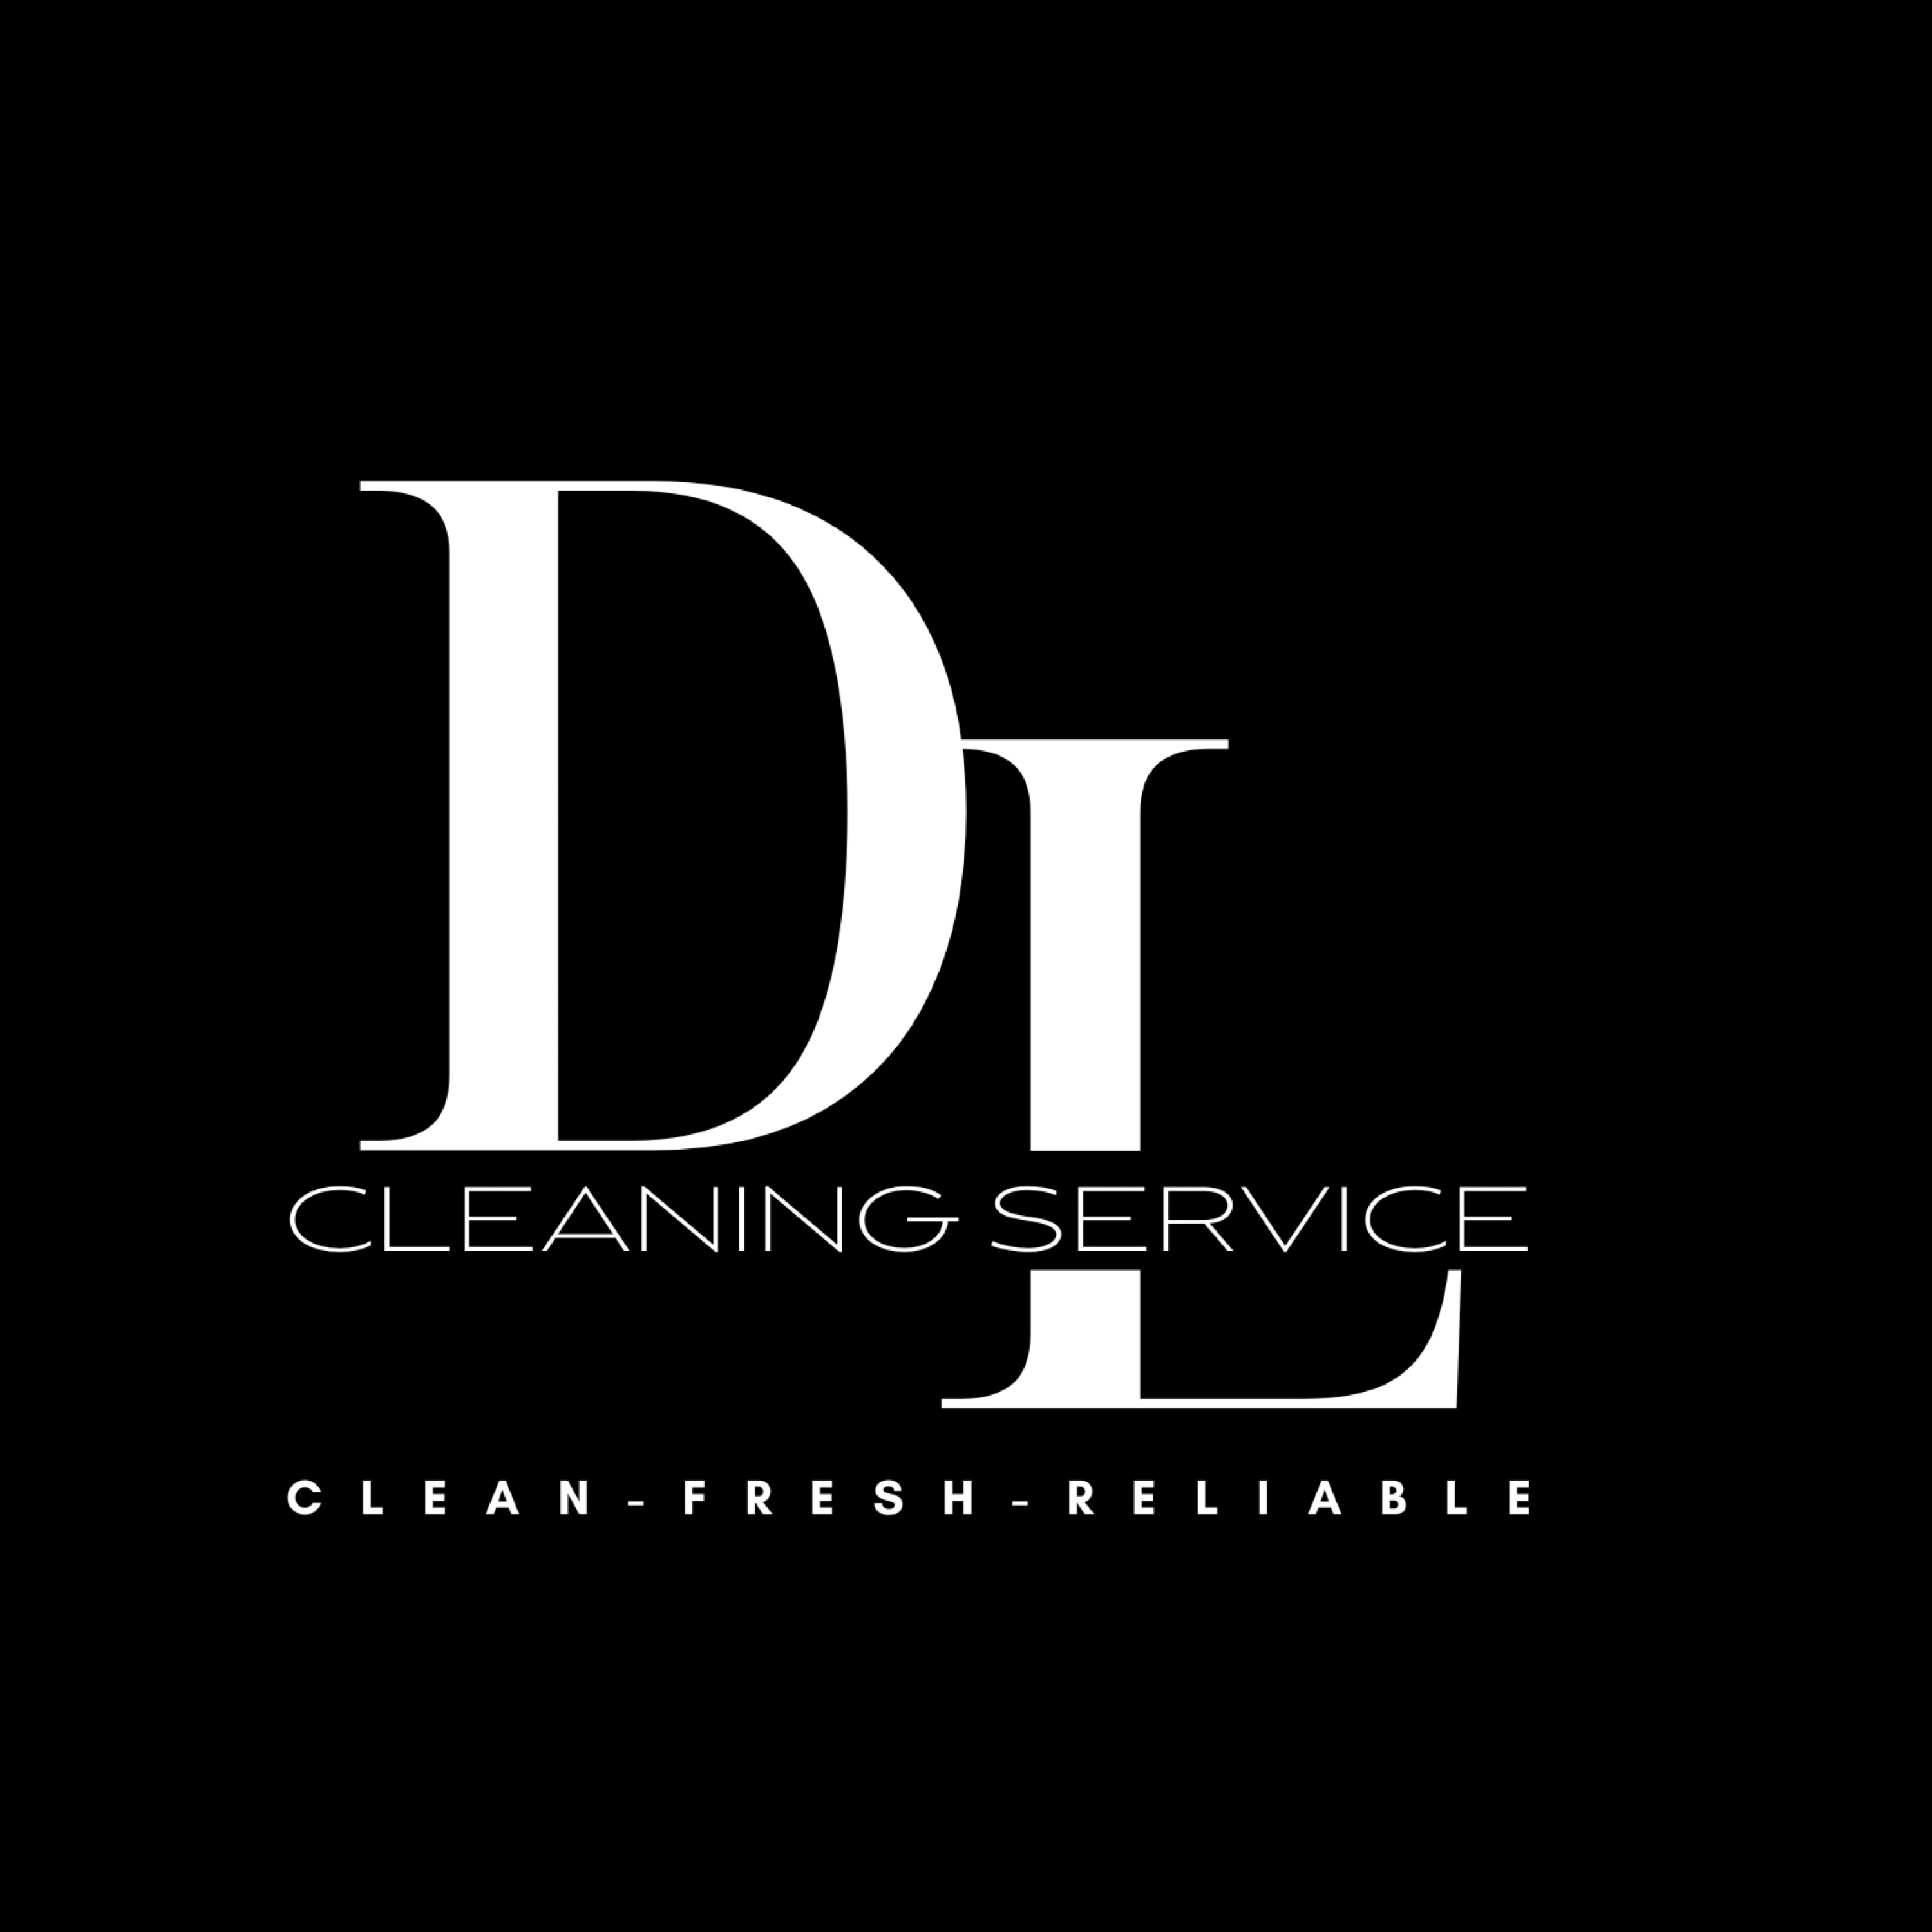 DL Cleaning Service Logo